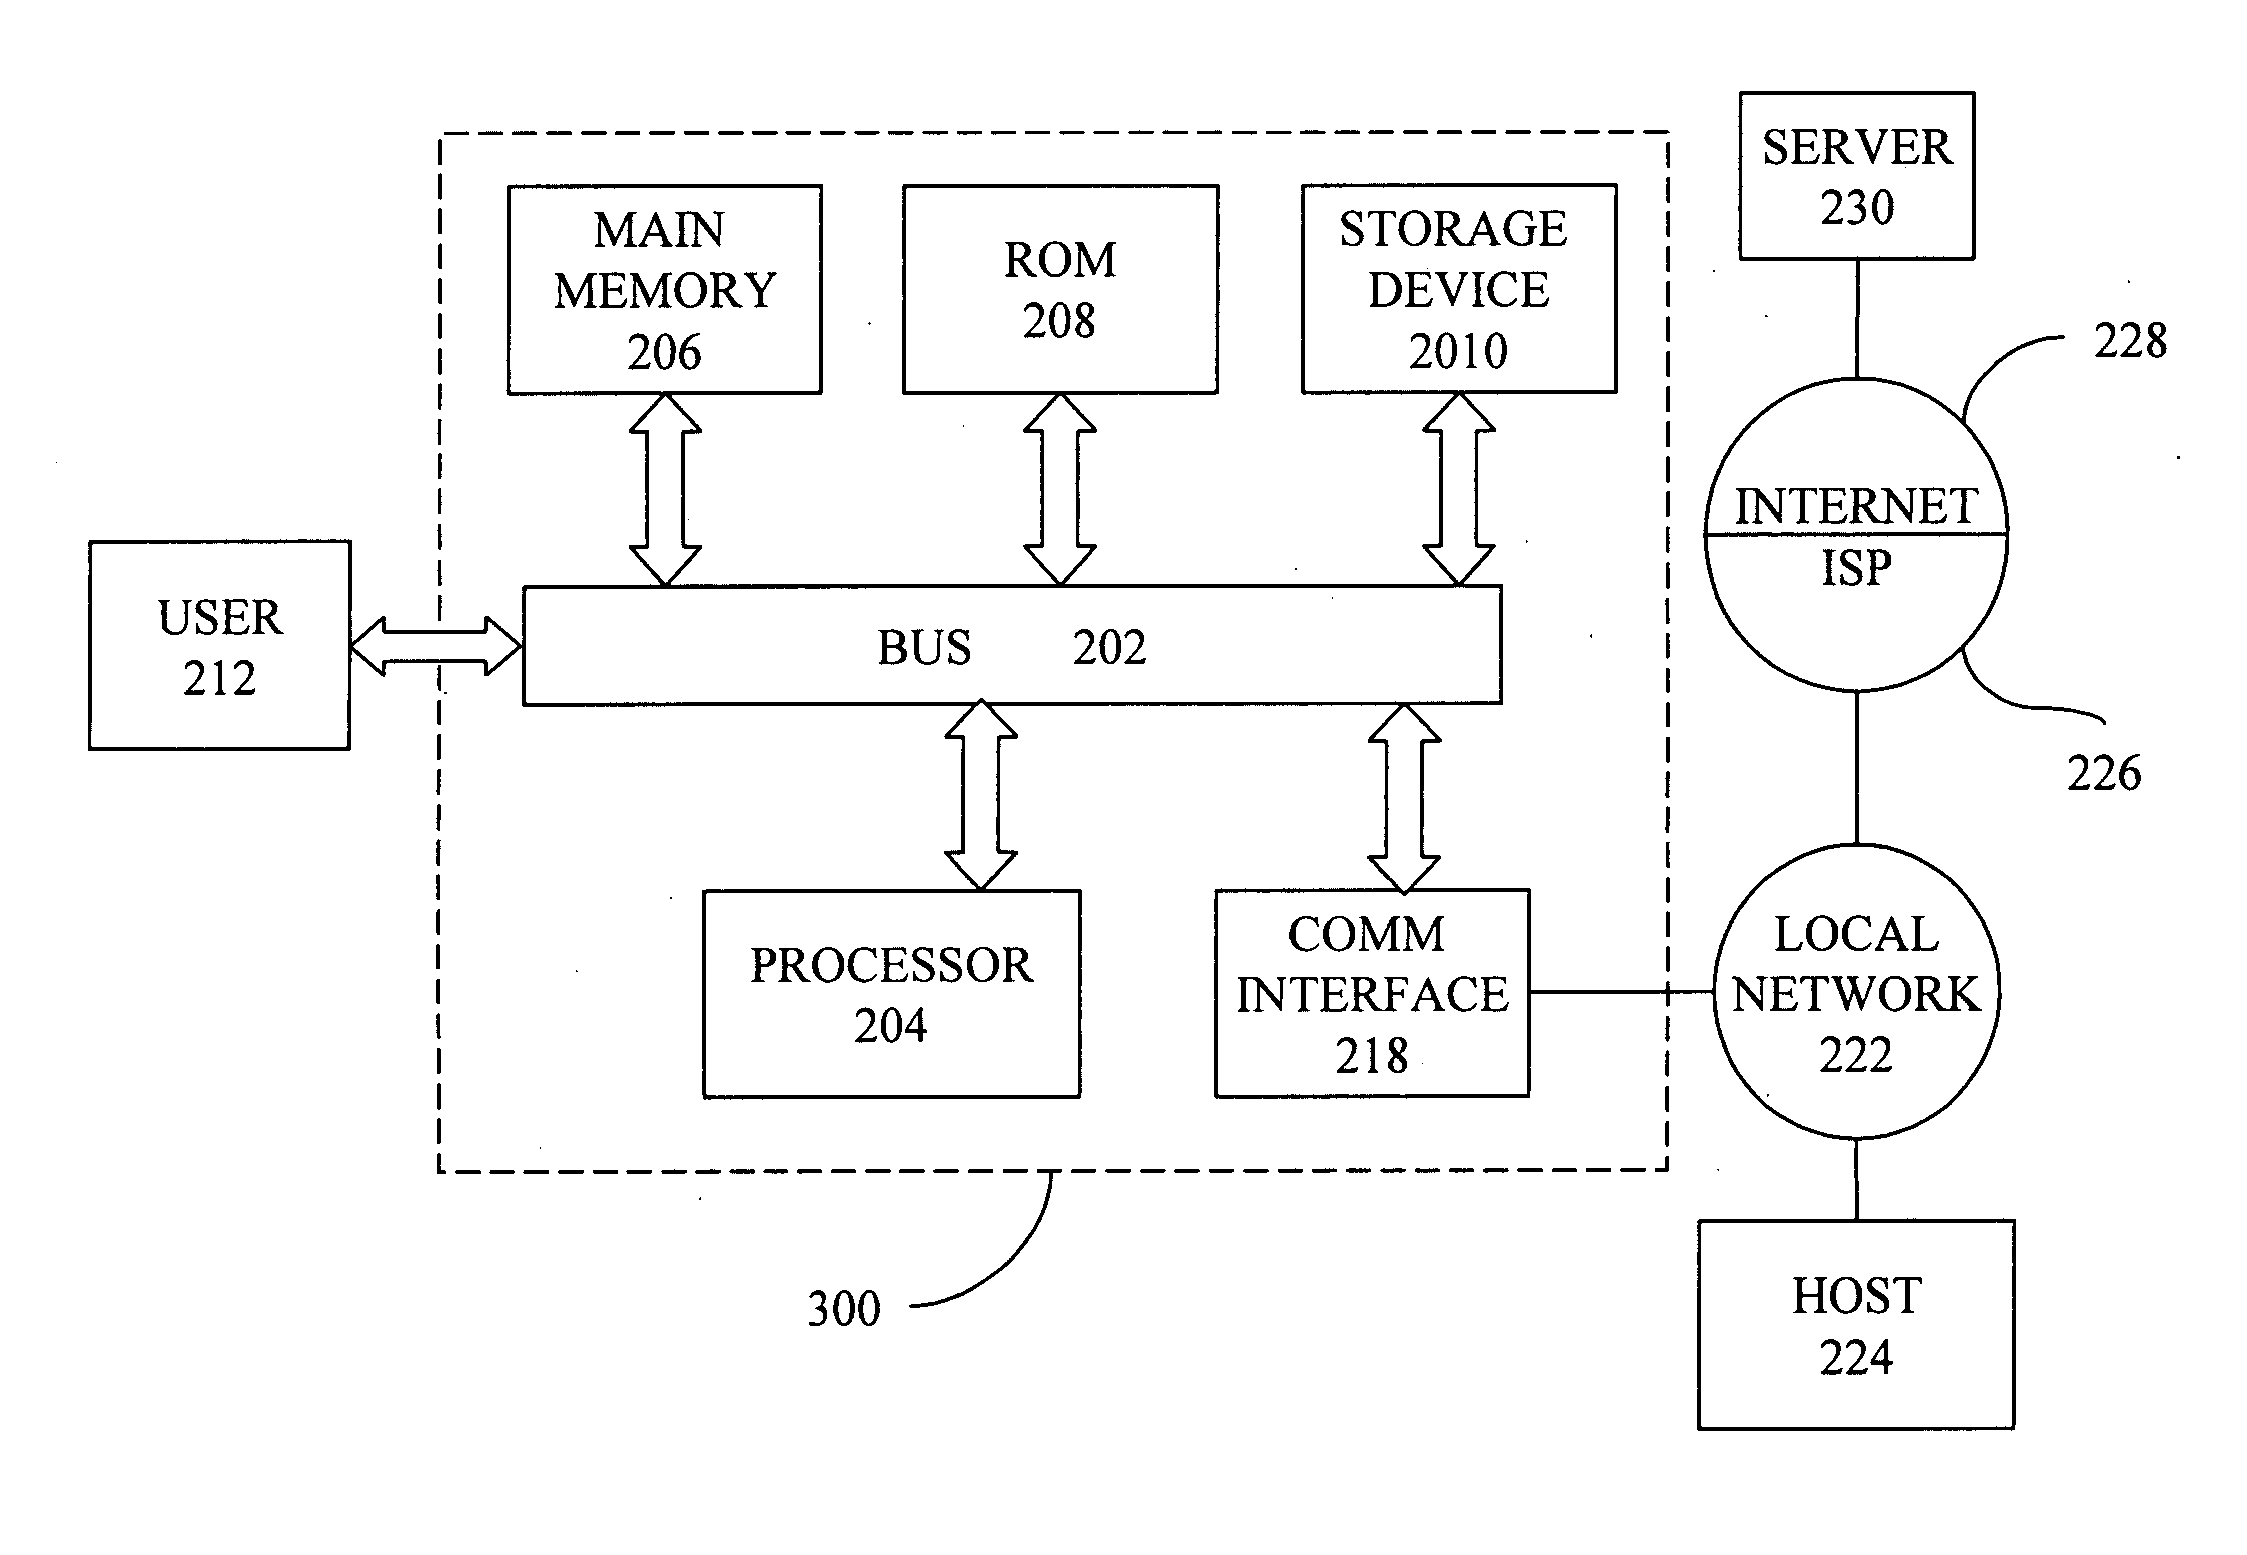 Redirecting network traffic through a multipoint tunnel overlay network using distinct network address spaces for the overlay and transport networks